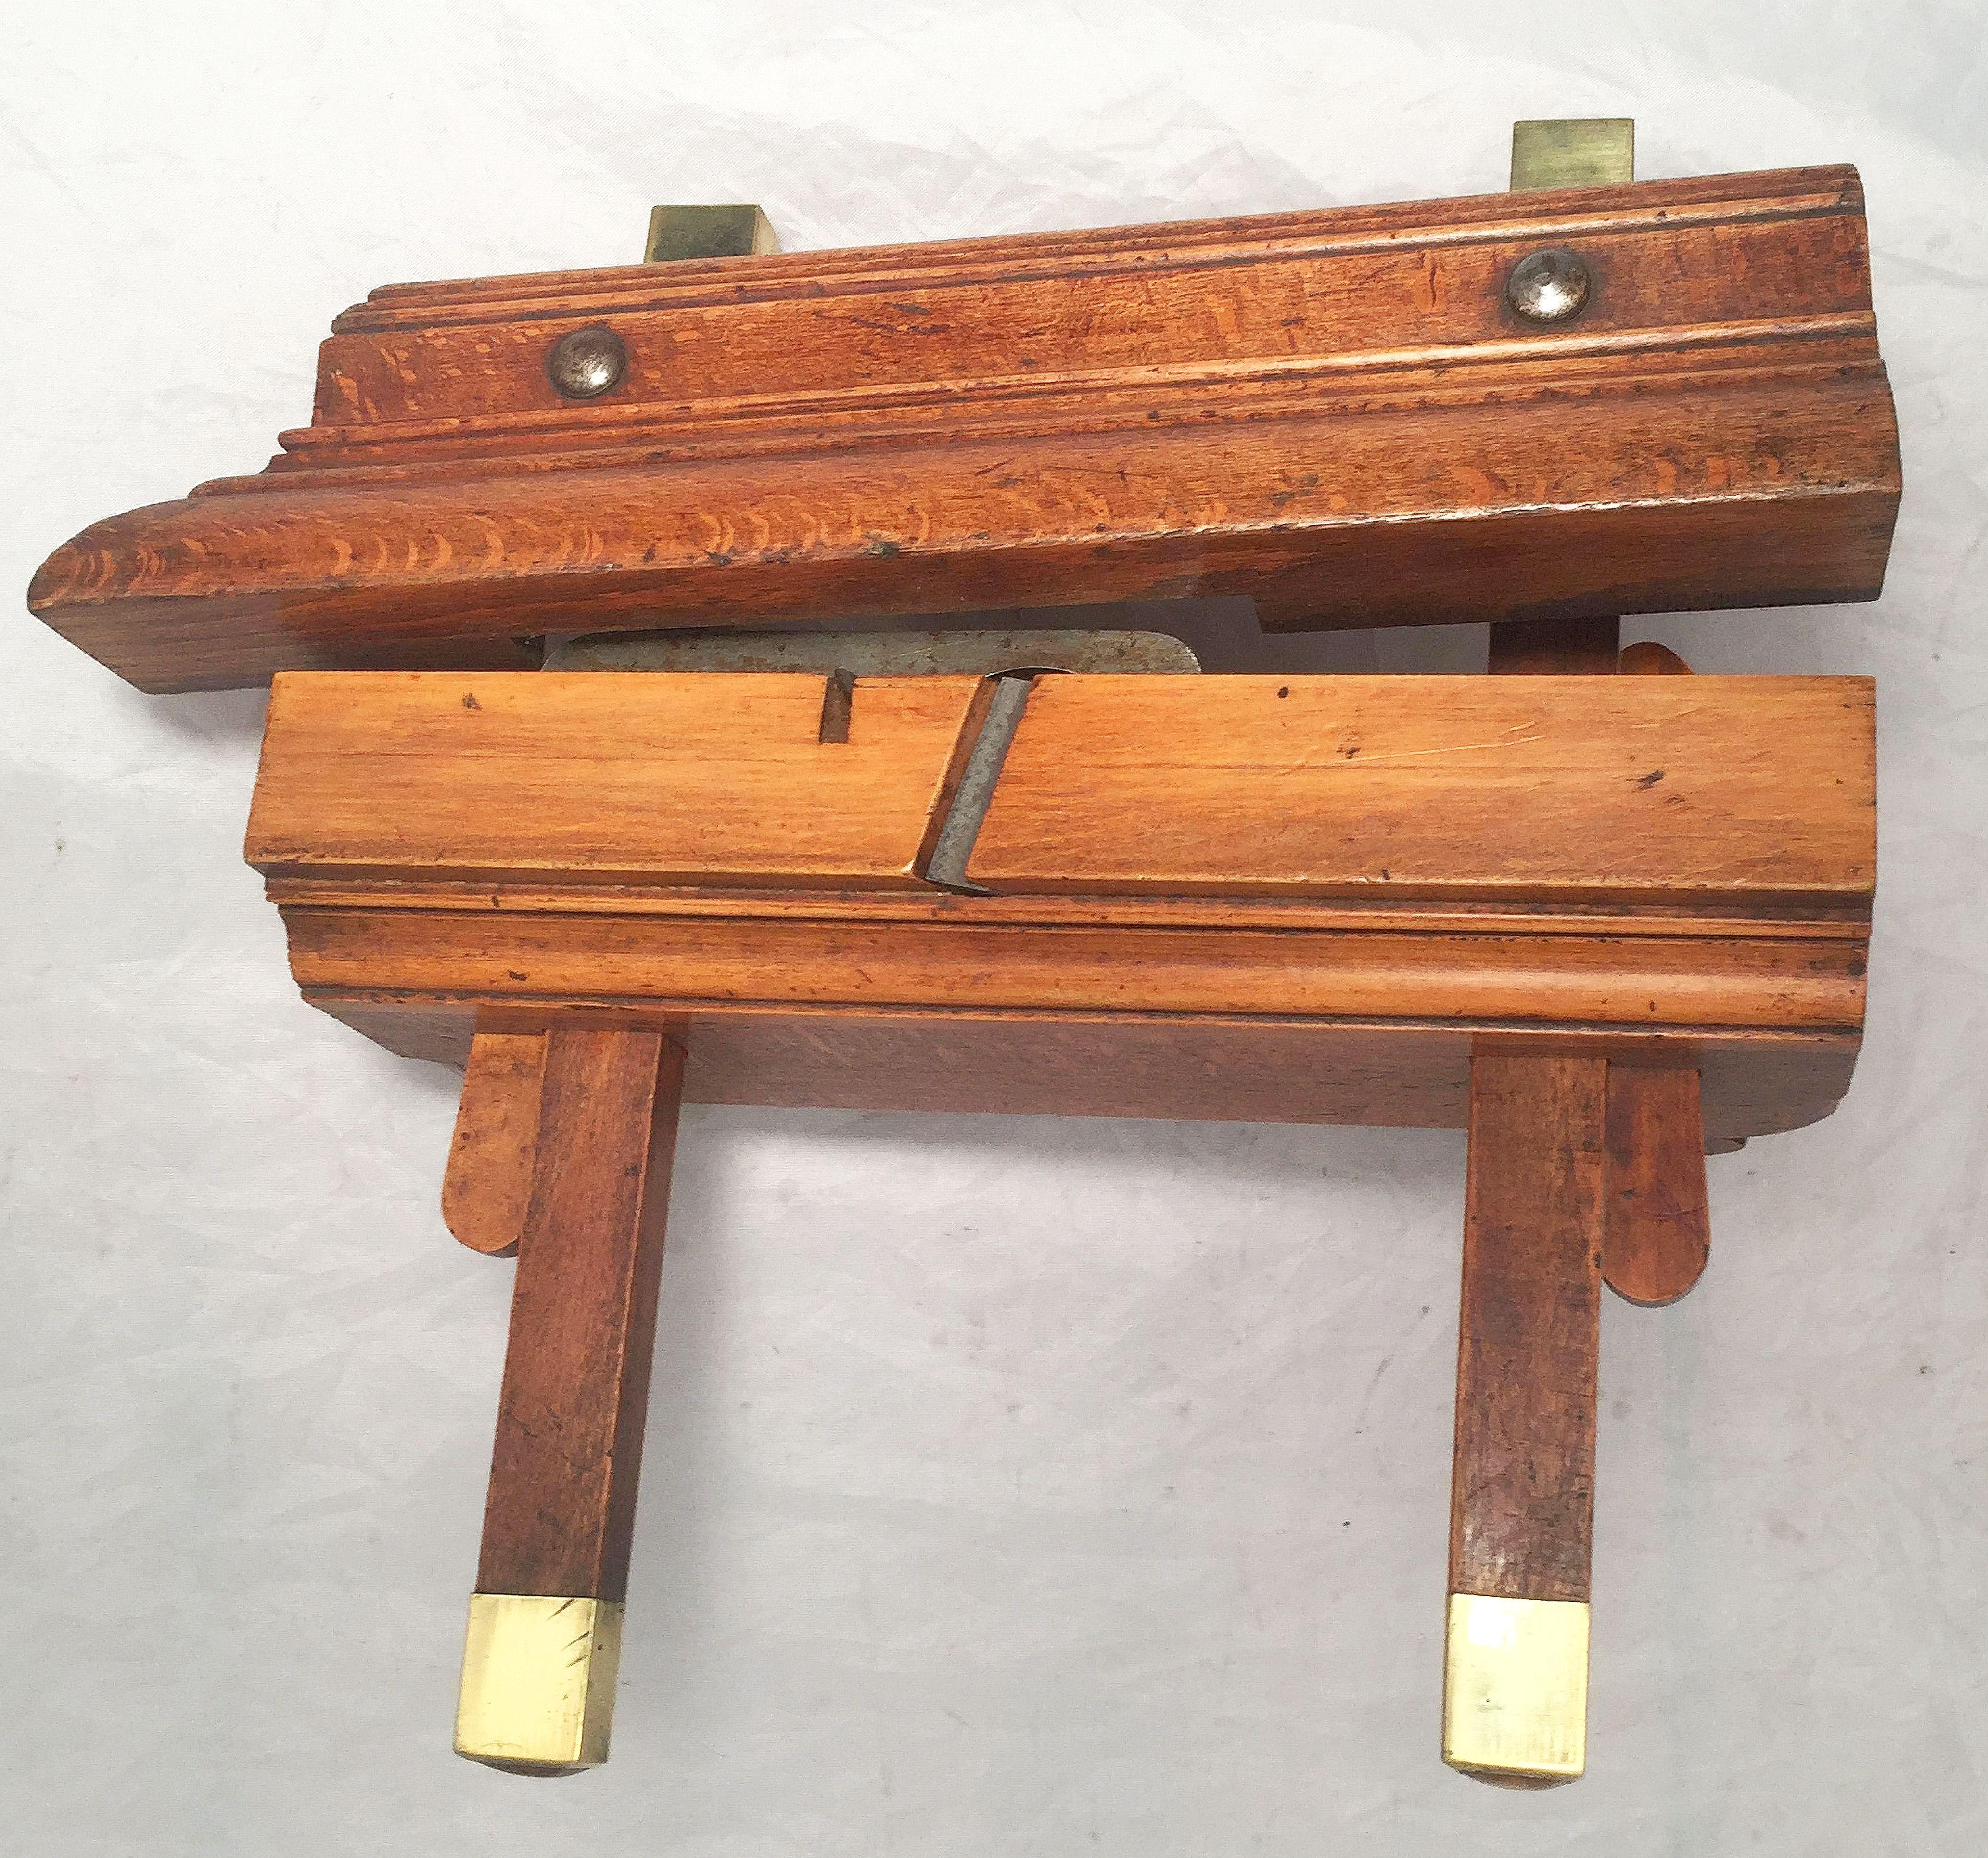 Beech English Shipwright's or Carpenter's Sash Fillister Plane by Atkin and Sons For Sale